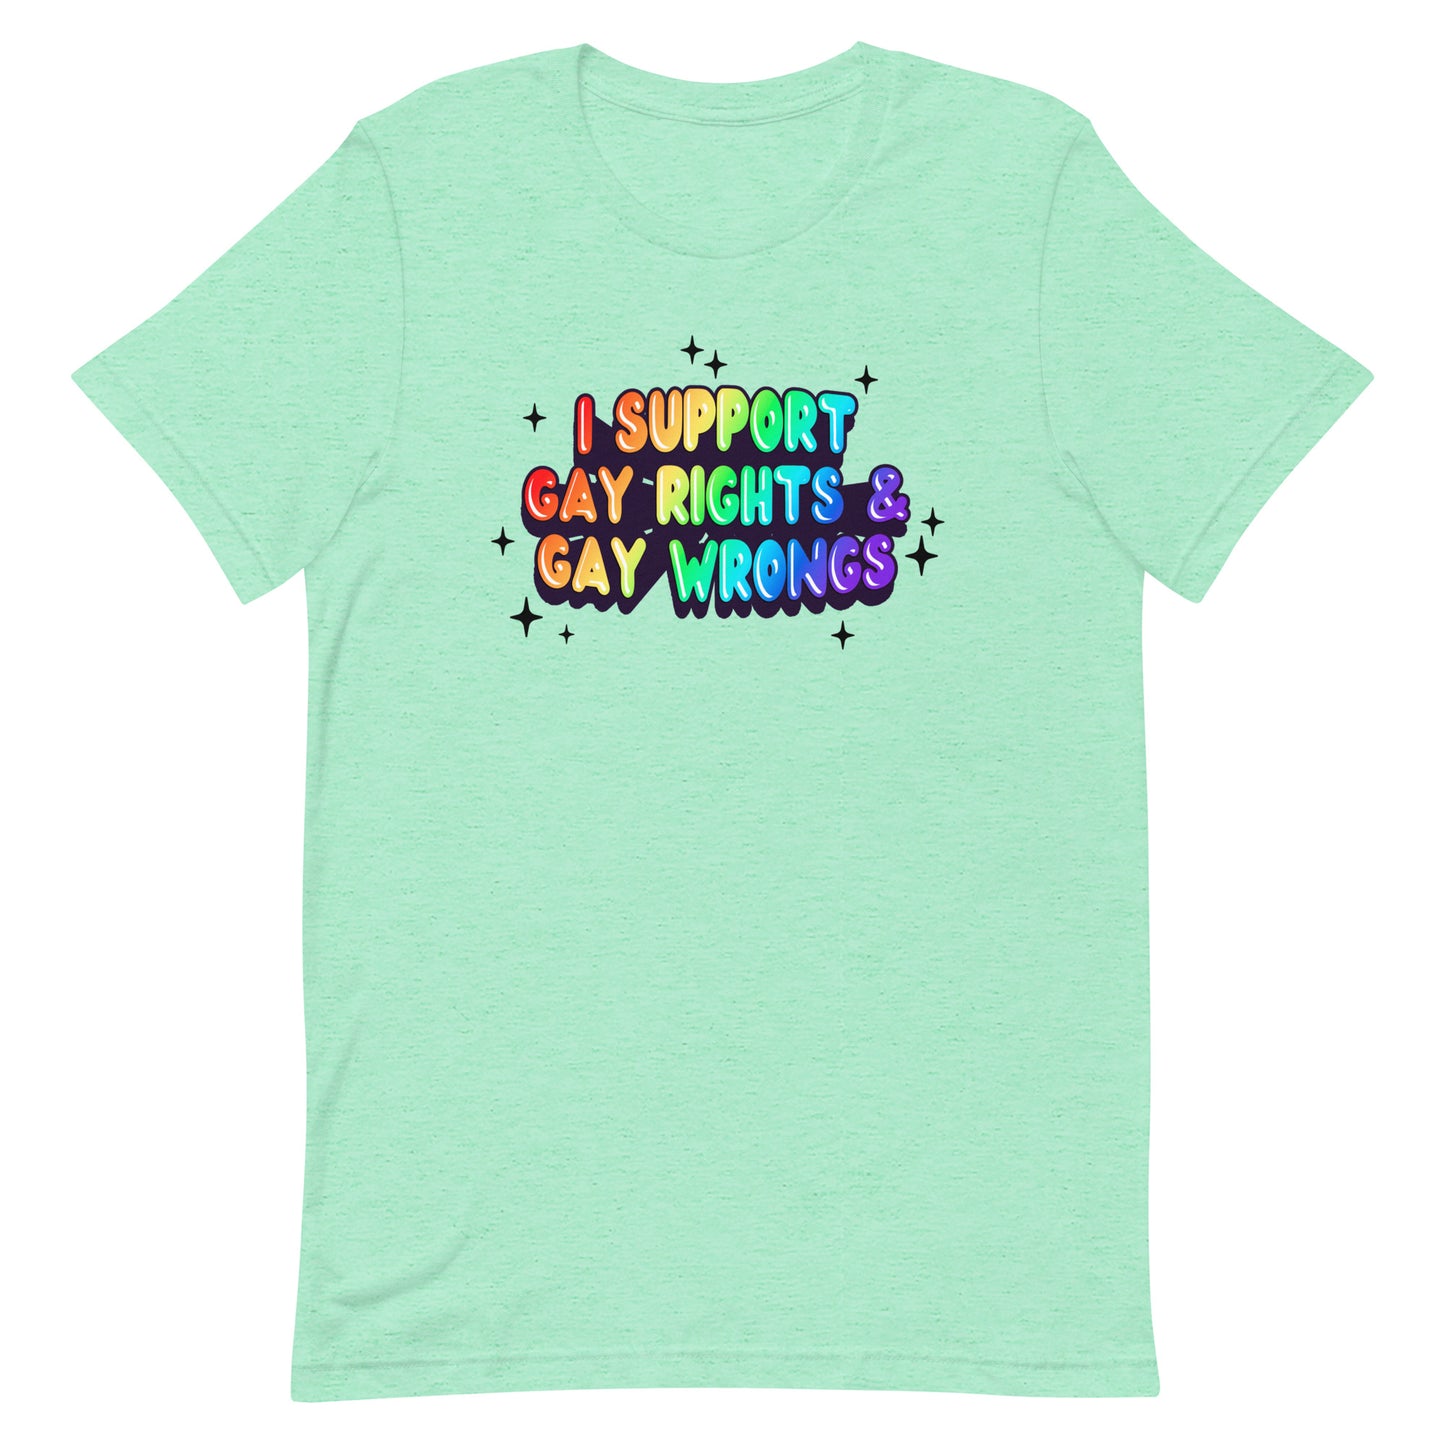 I Support Gay Rights & Gay Wrongs Unisex t-shirt